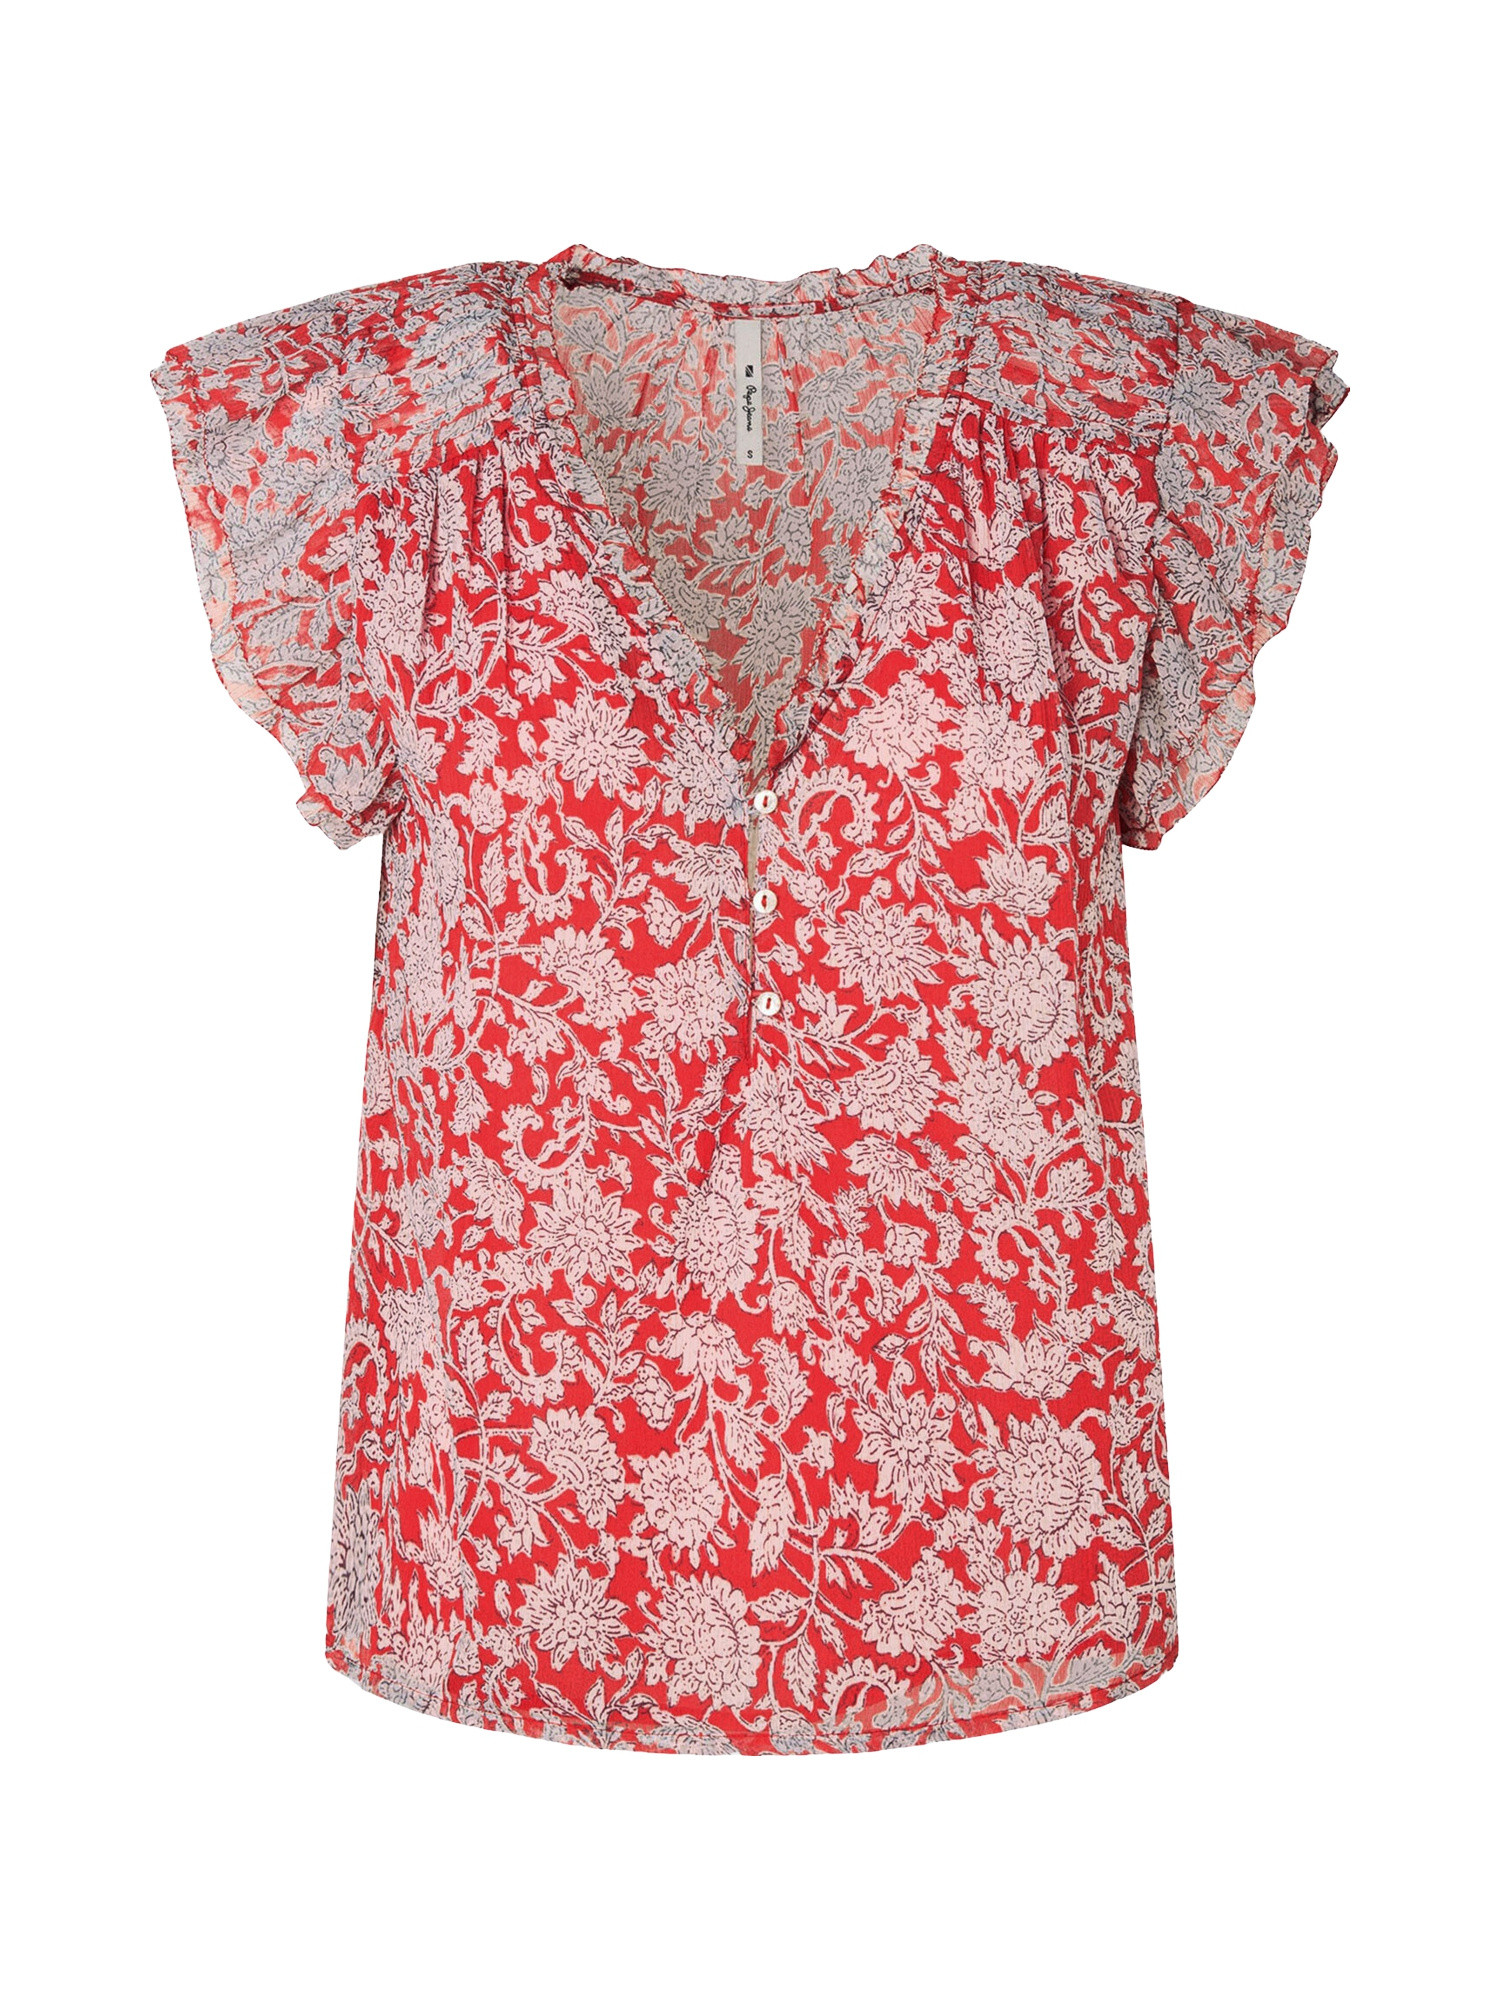 Pepe Jeans - Patterned top, Red, large image number 0